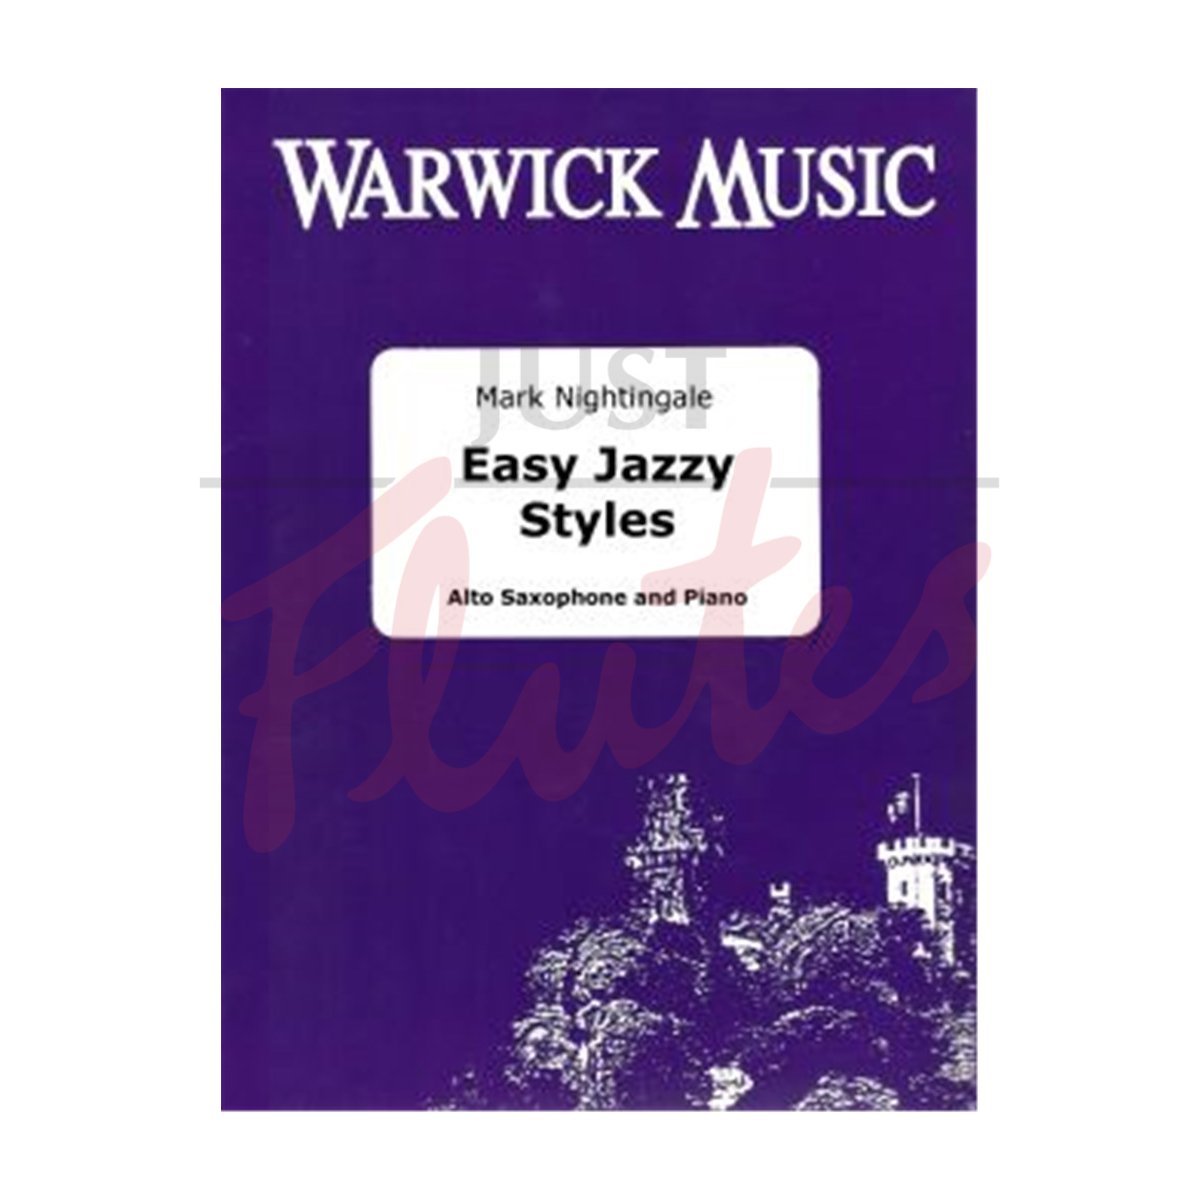 Easy Jazzy Styles for Alto Saxophone and Piano